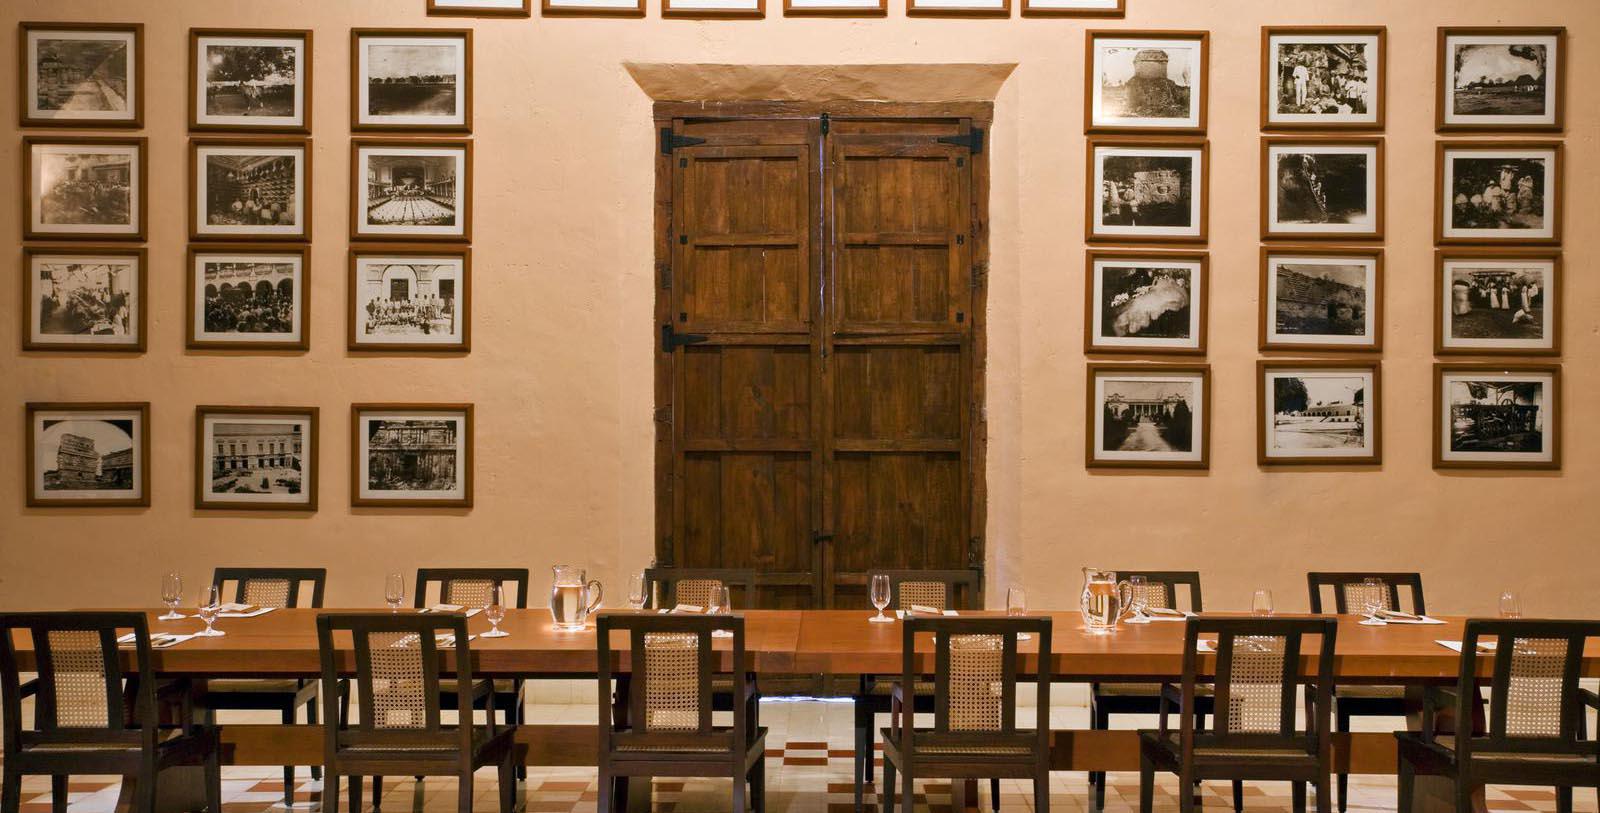 Image of Meeting Room Boardroom, Hacienda Temozon, A Luxury Collection Hotel, Temozon Sur, Mexico, 1655, Member of Historic Hotels Worldwide, Special Occasions